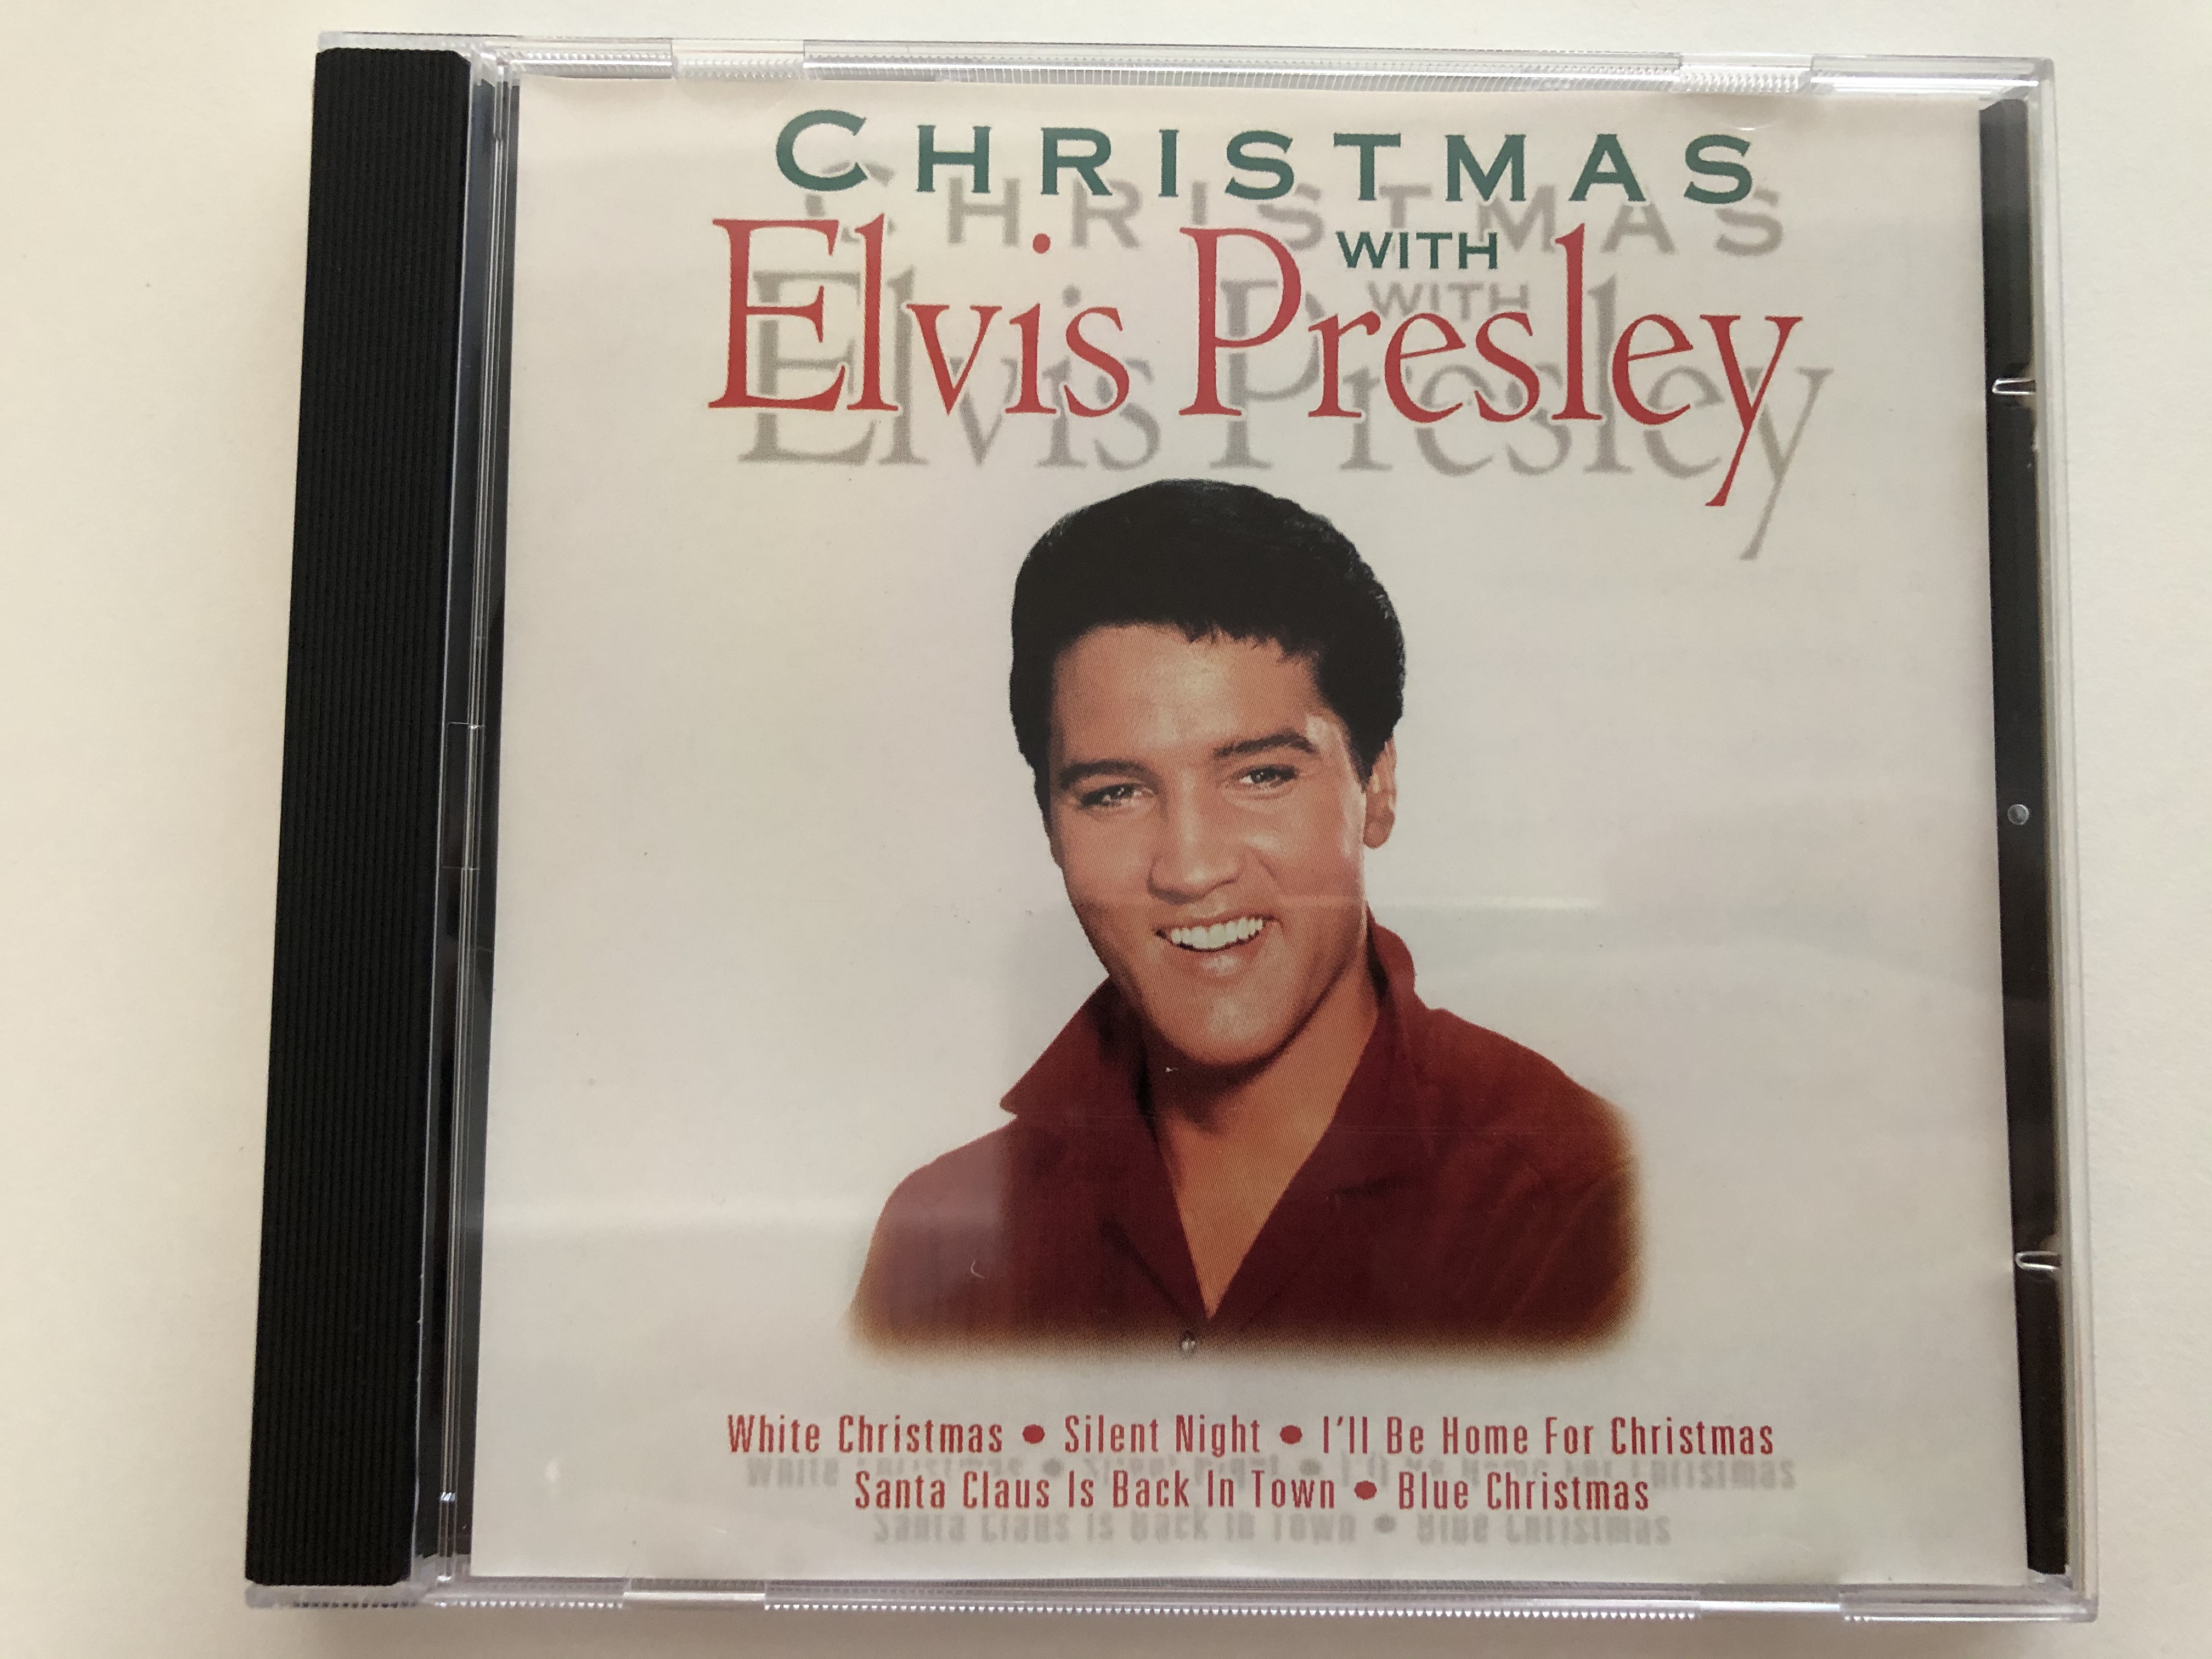 christmas-with-elvis-presley-white-christmas-silent-night-i-ll-be-home-for-christmas-santa-claus-is-back-in-town-blue-christmas-weton-wesgram-audio-cd-2008-dgr80257-1-.jpg